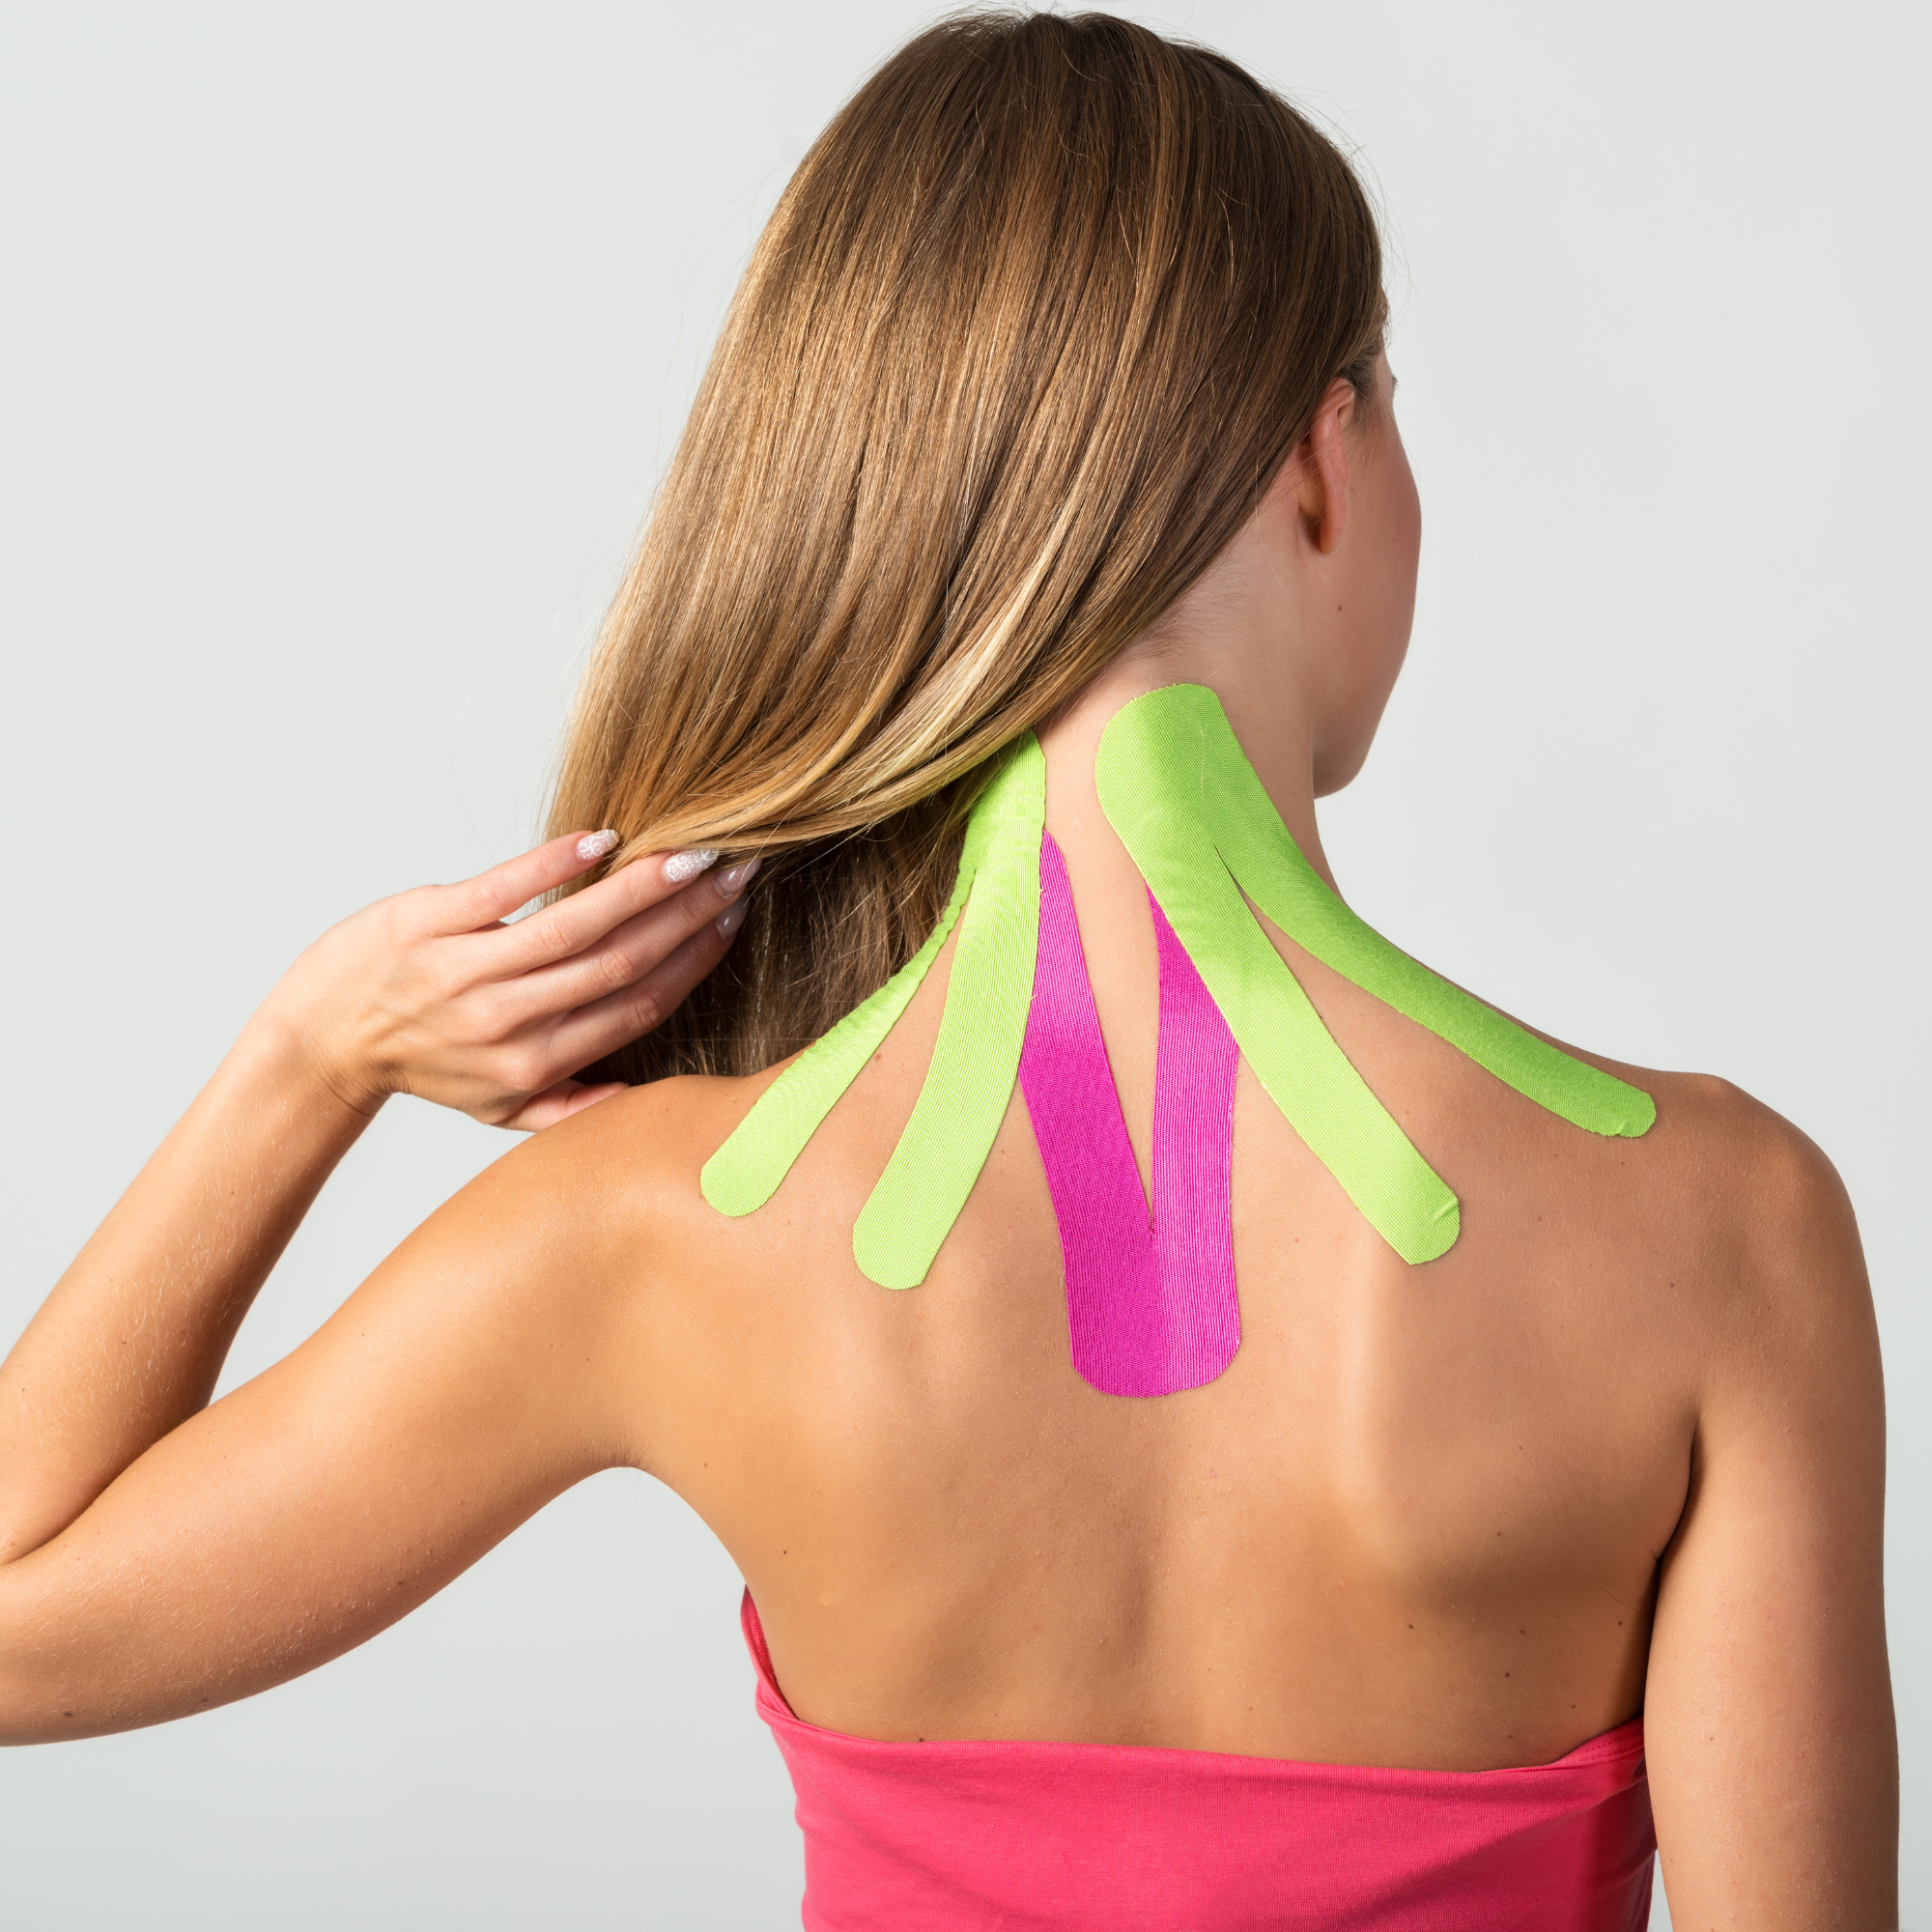 Athlete with Kinesio tape applied to the neck, aiding in recovery from a sports-related injury